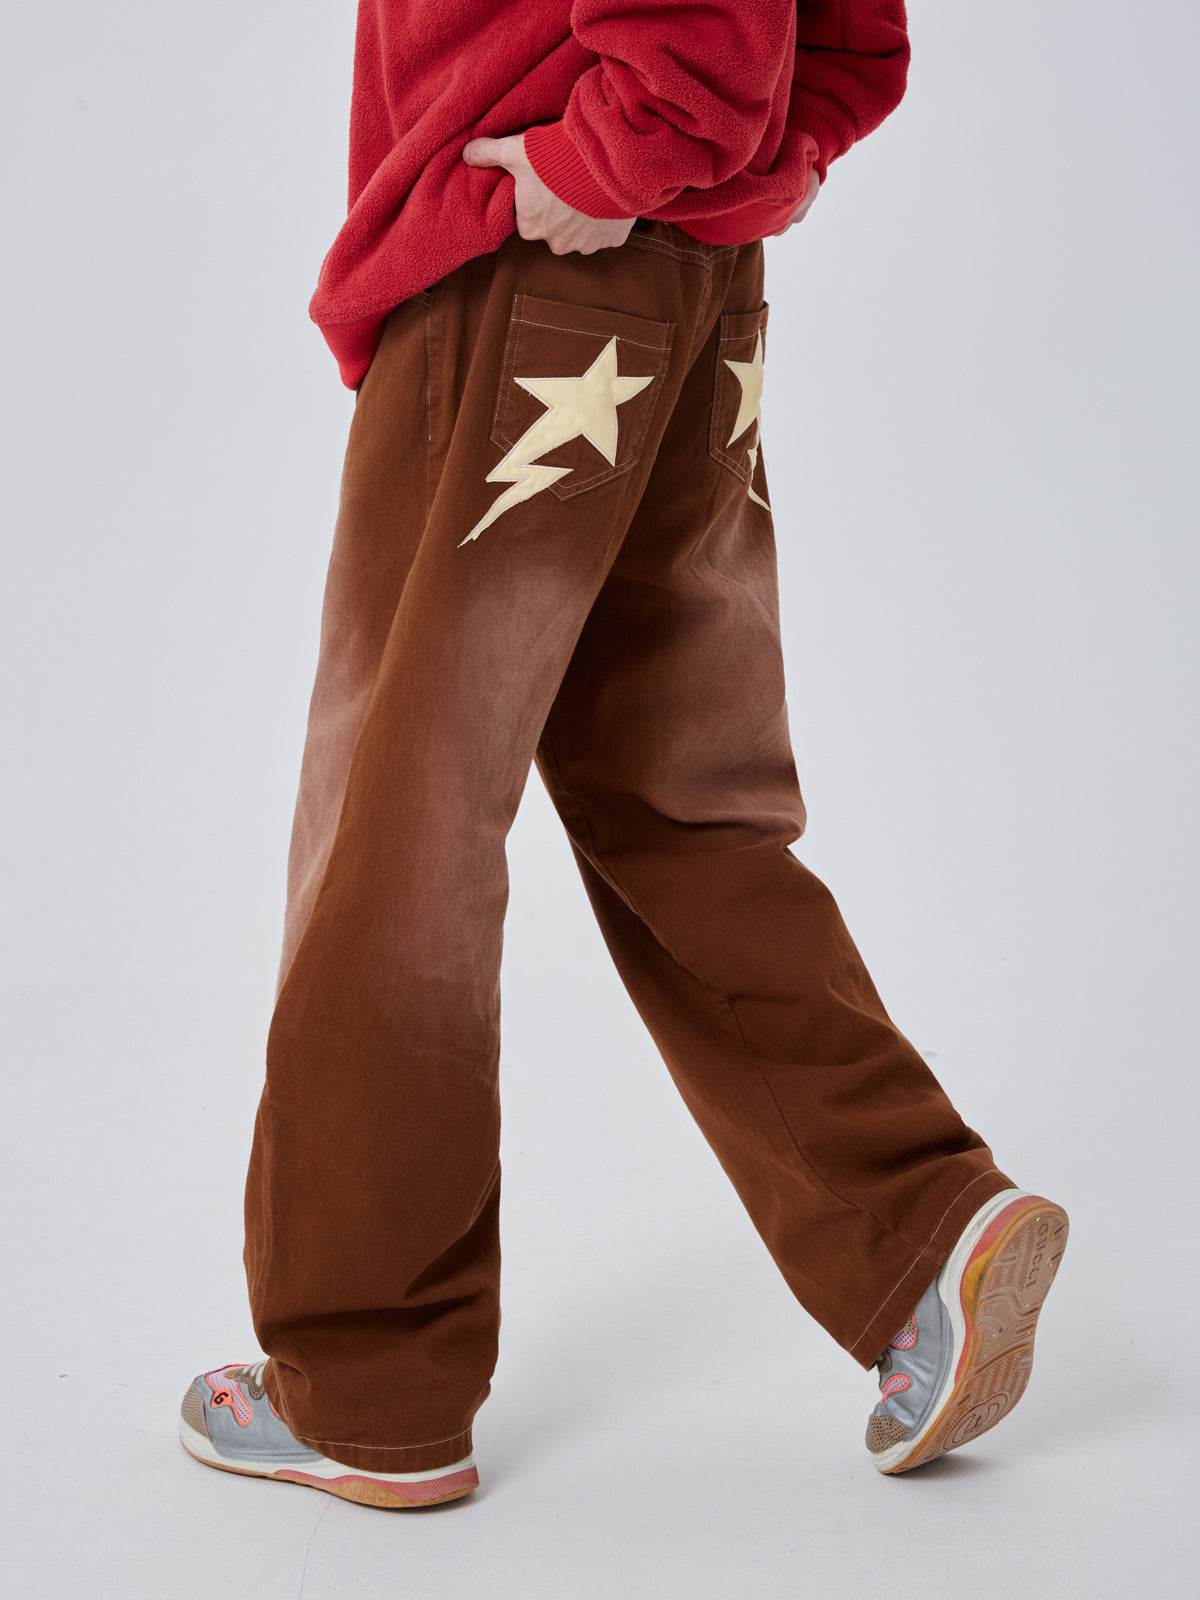 LUXENFY™ - American High Street Star Embroidered Jeans-1475 luxenfy.com